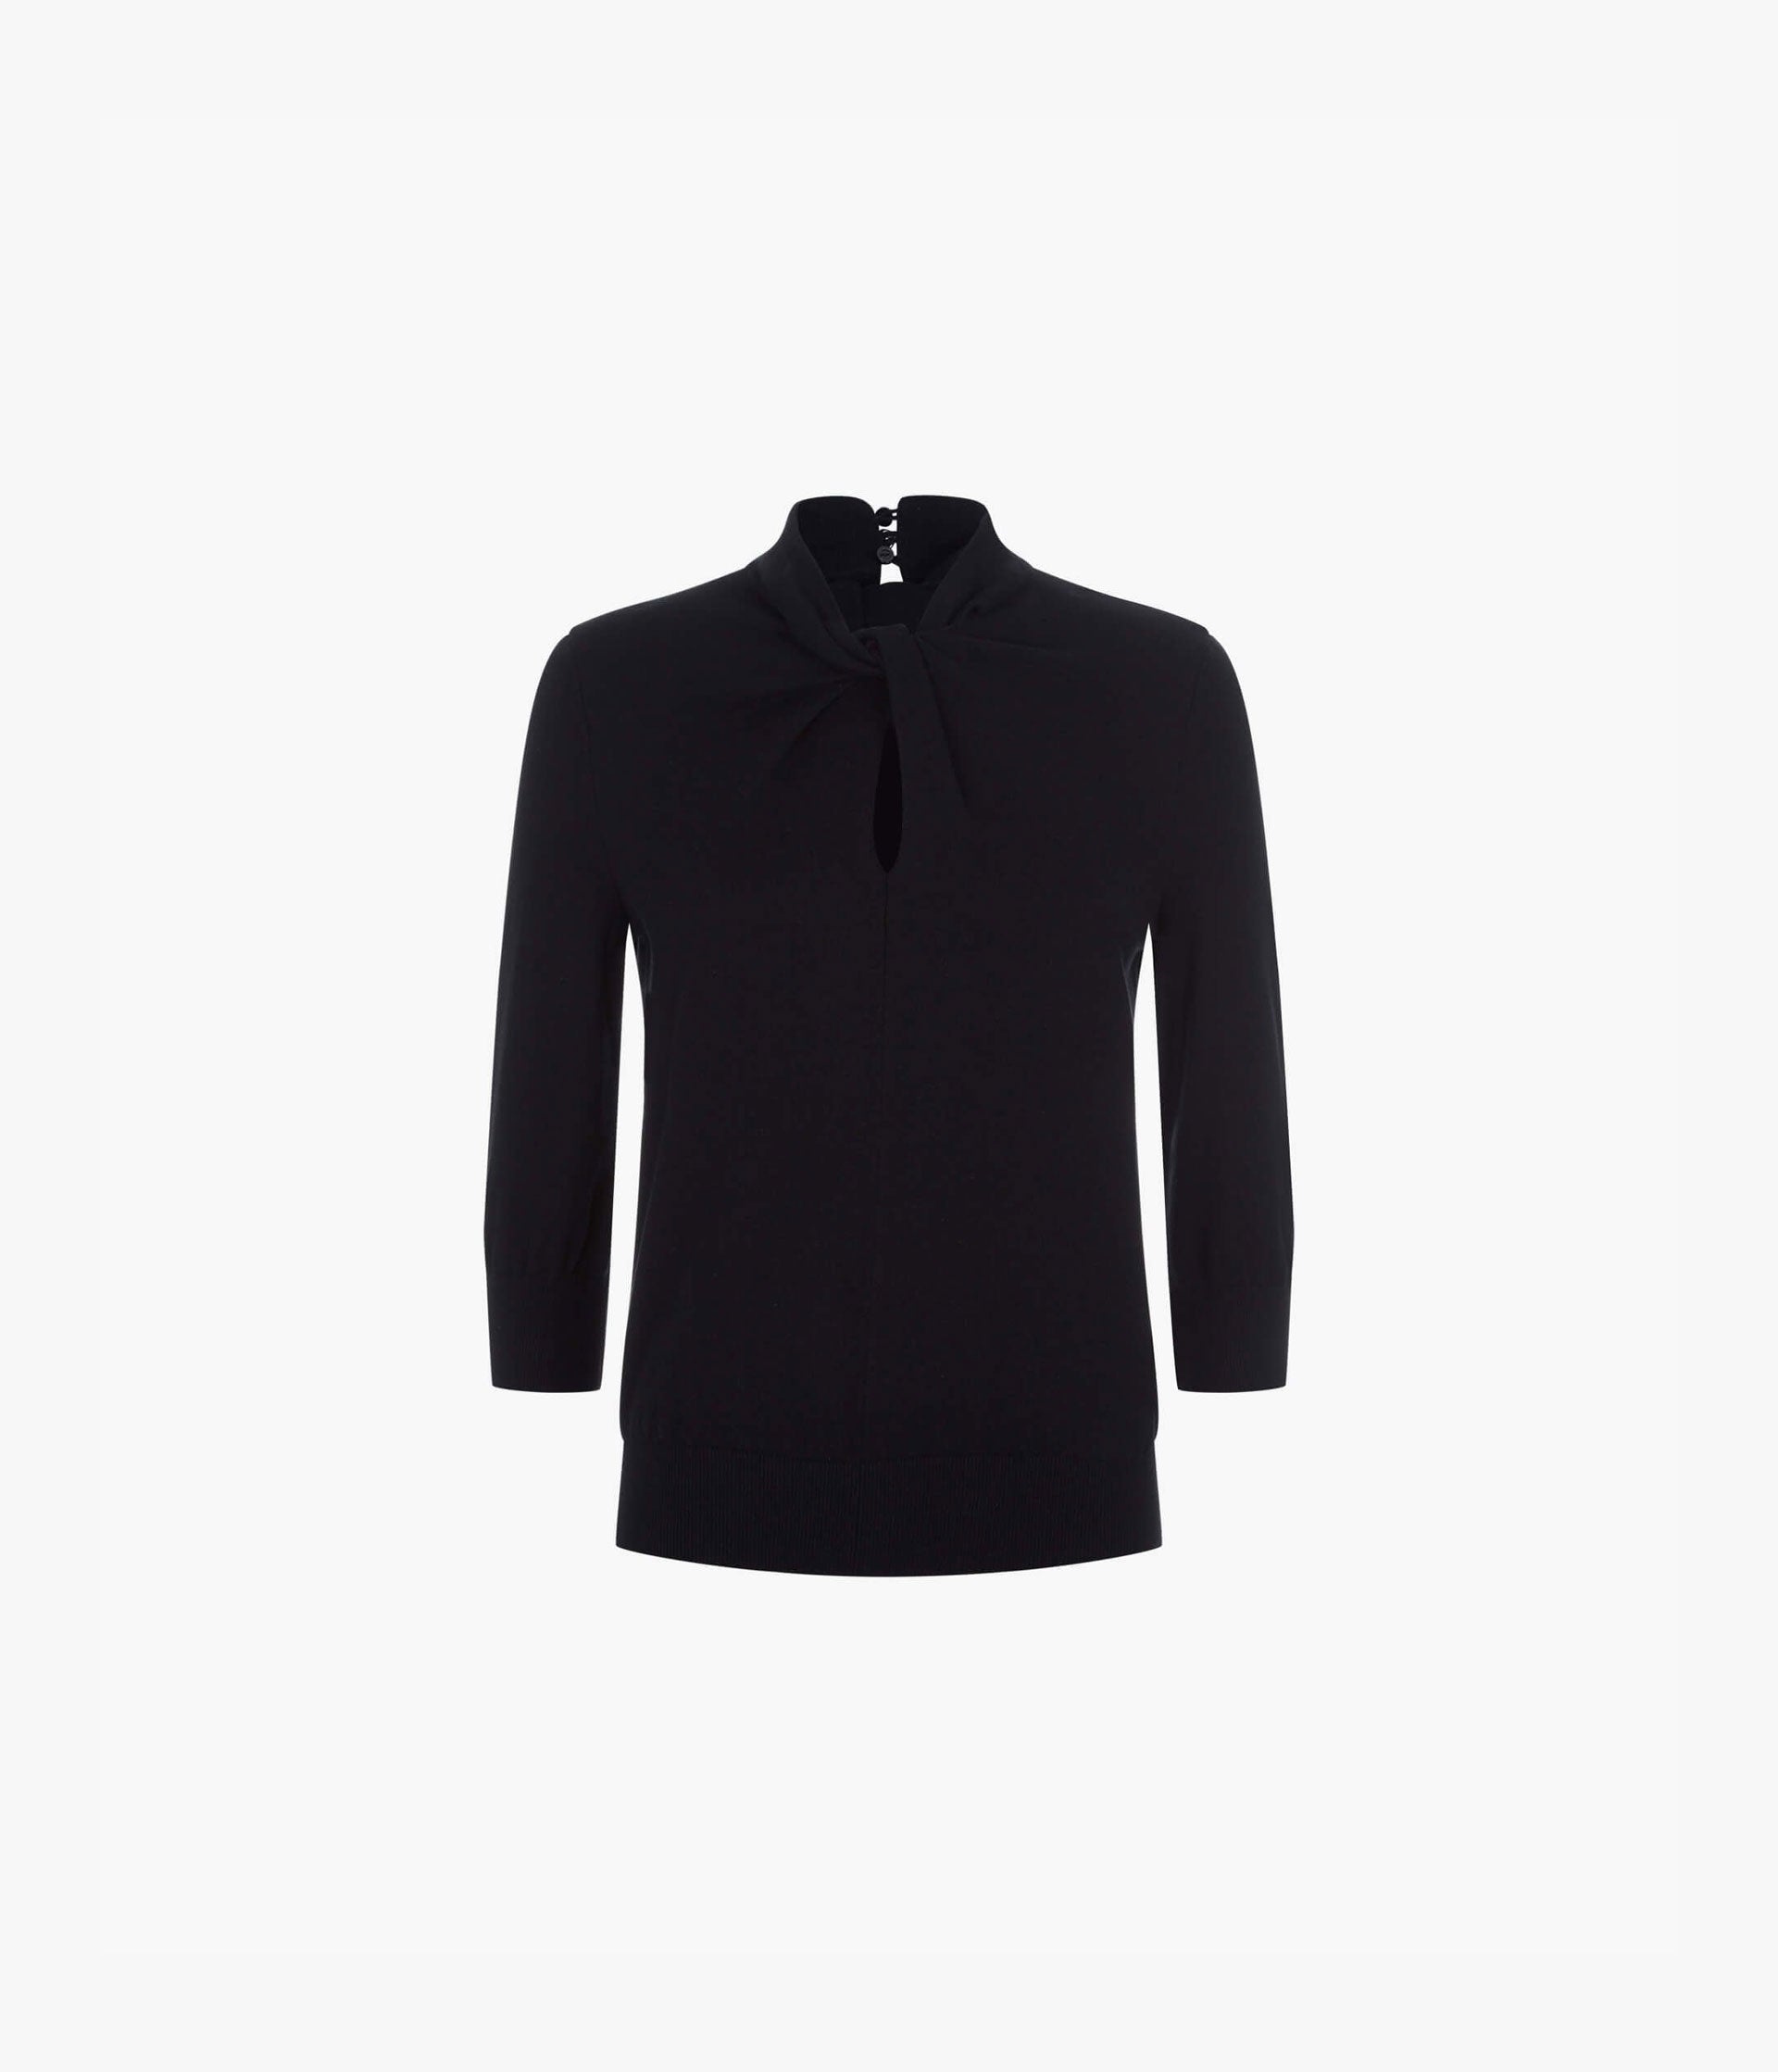 Black jumper with cropped fitted three quarter length sleeves and a twisted neckline detail. 